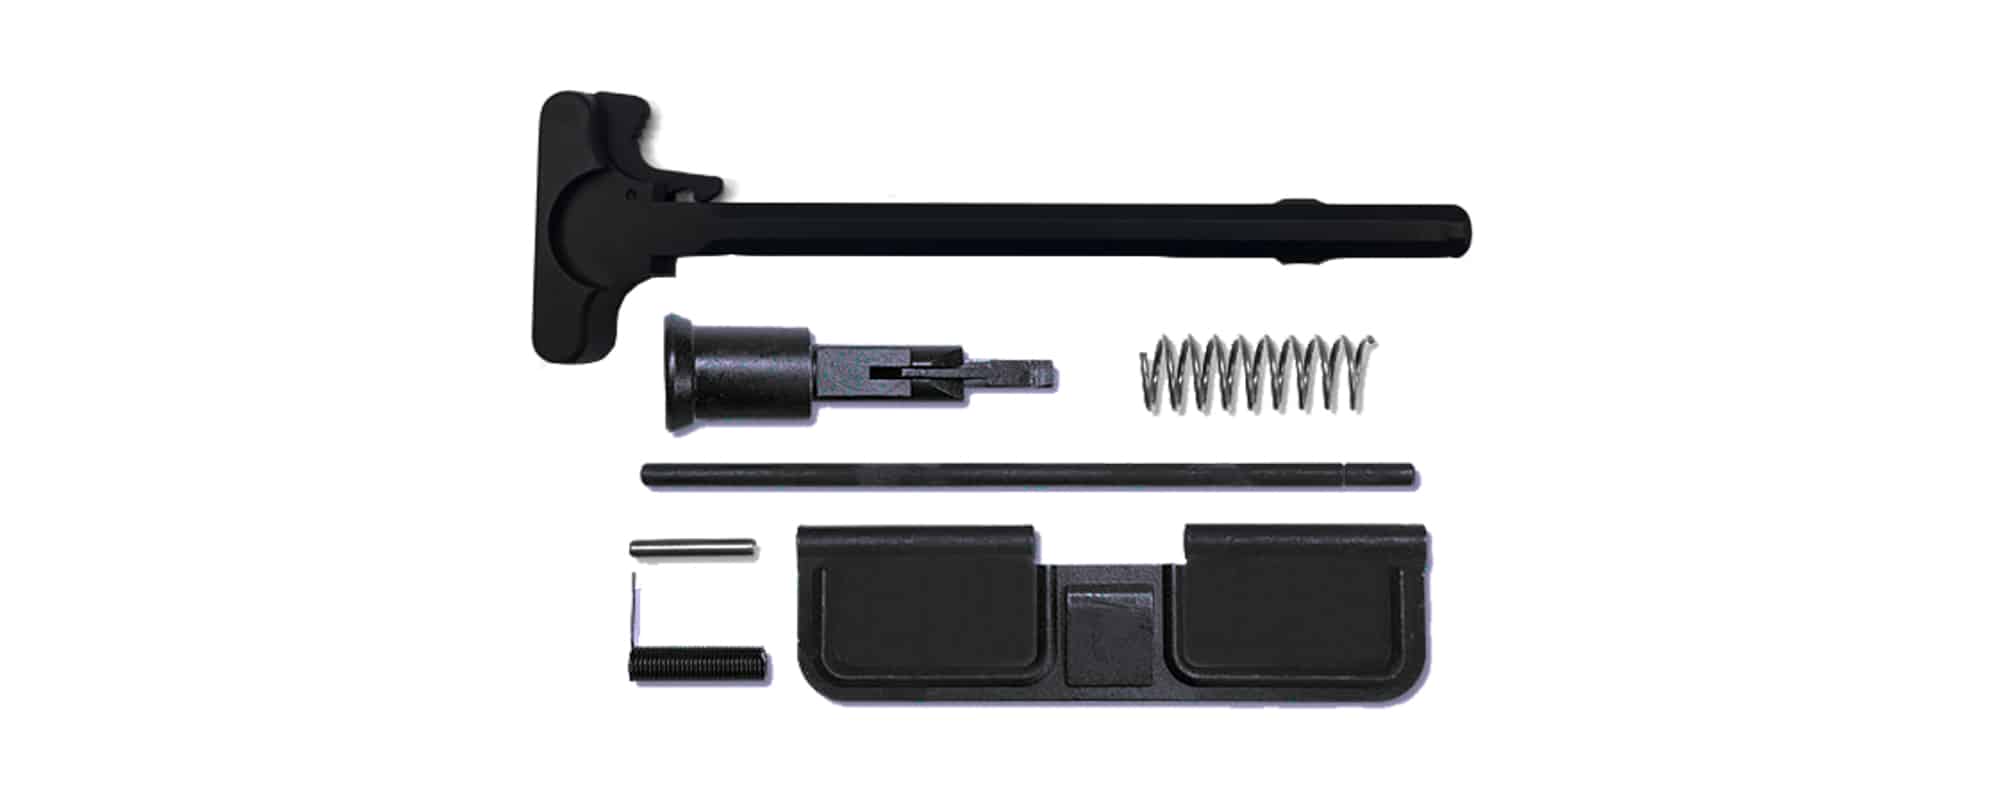 Upper Parts Kit W/ Charging handle